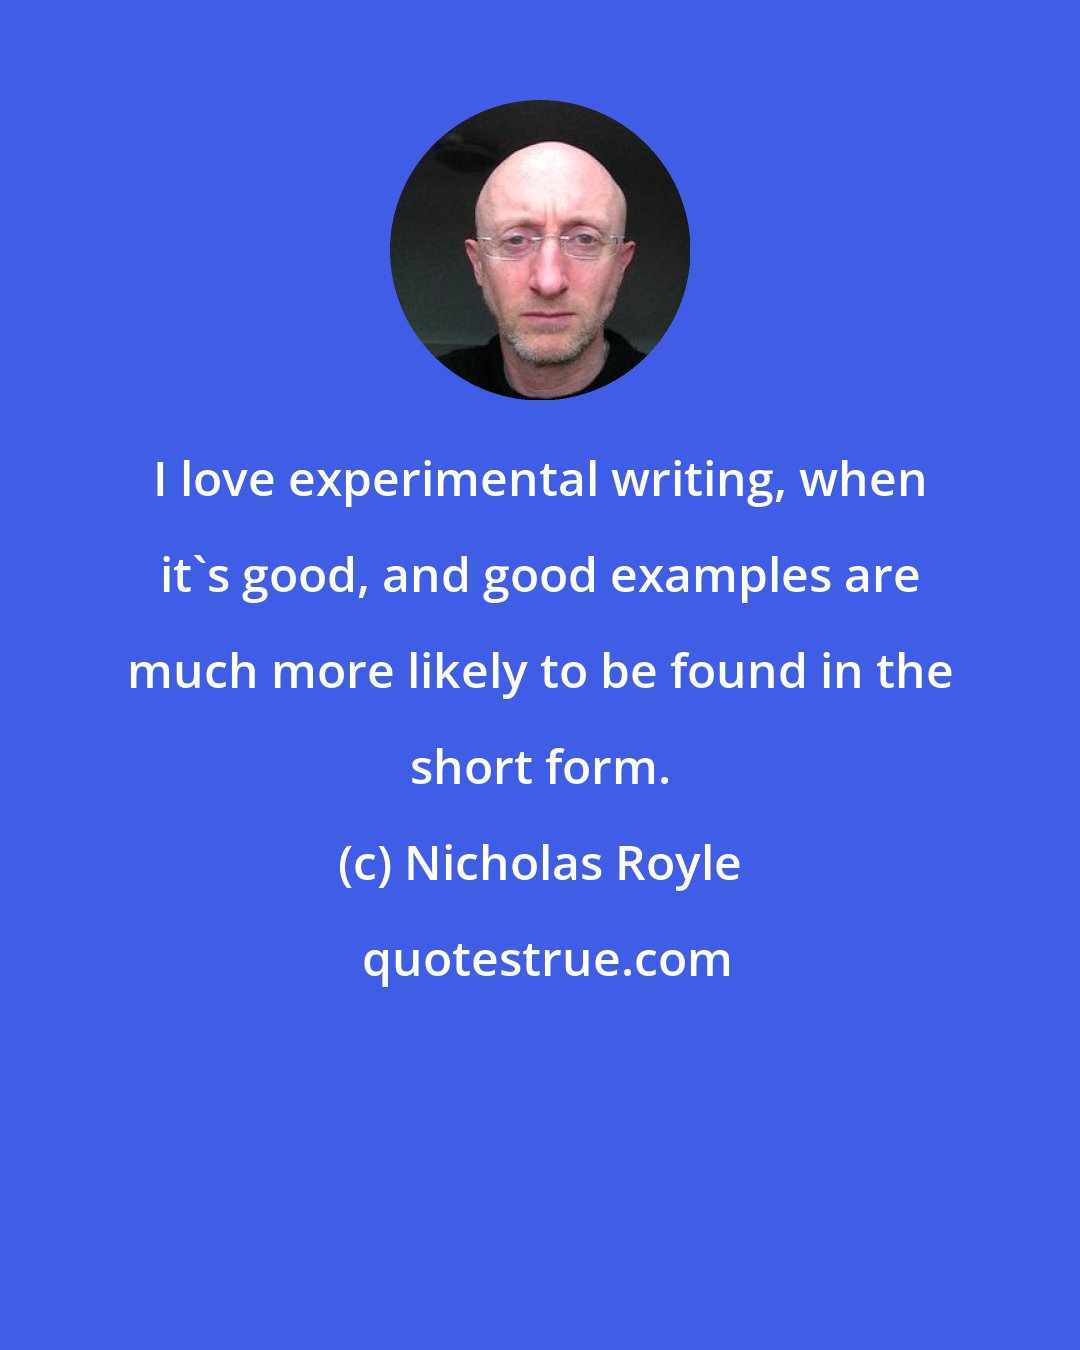 Nicholas Royle: I love experimental writing, when it's good, and good examples are much more likely to be found in the short form.